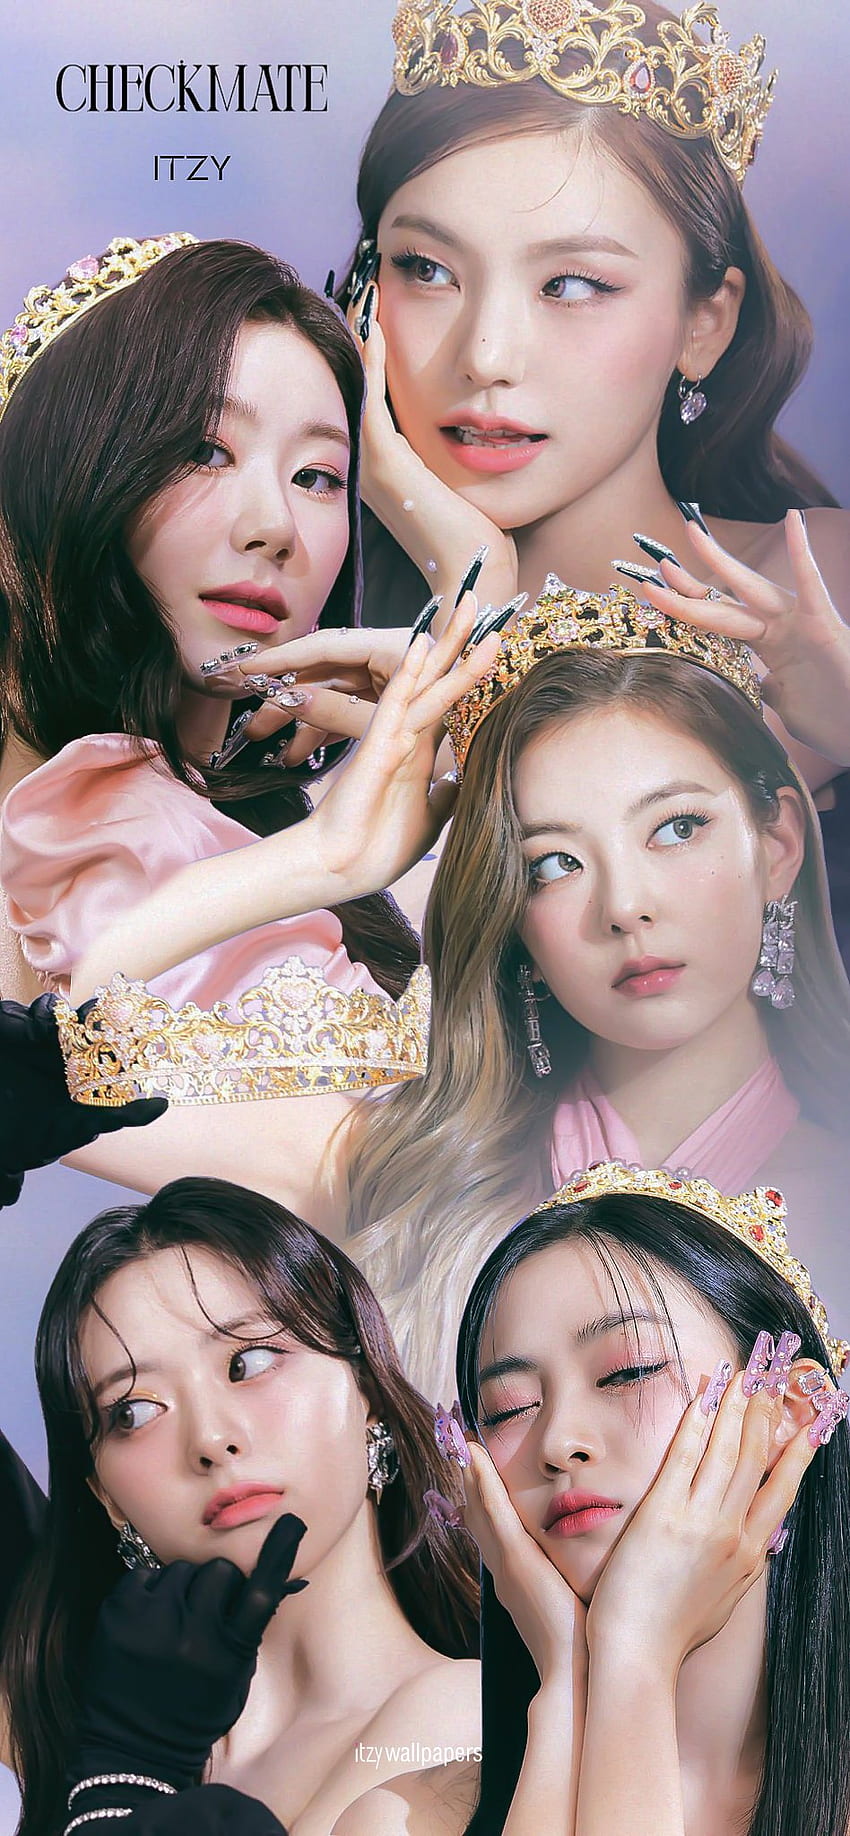 Itzy Checkmate concept, kpop HD phone wallpaper